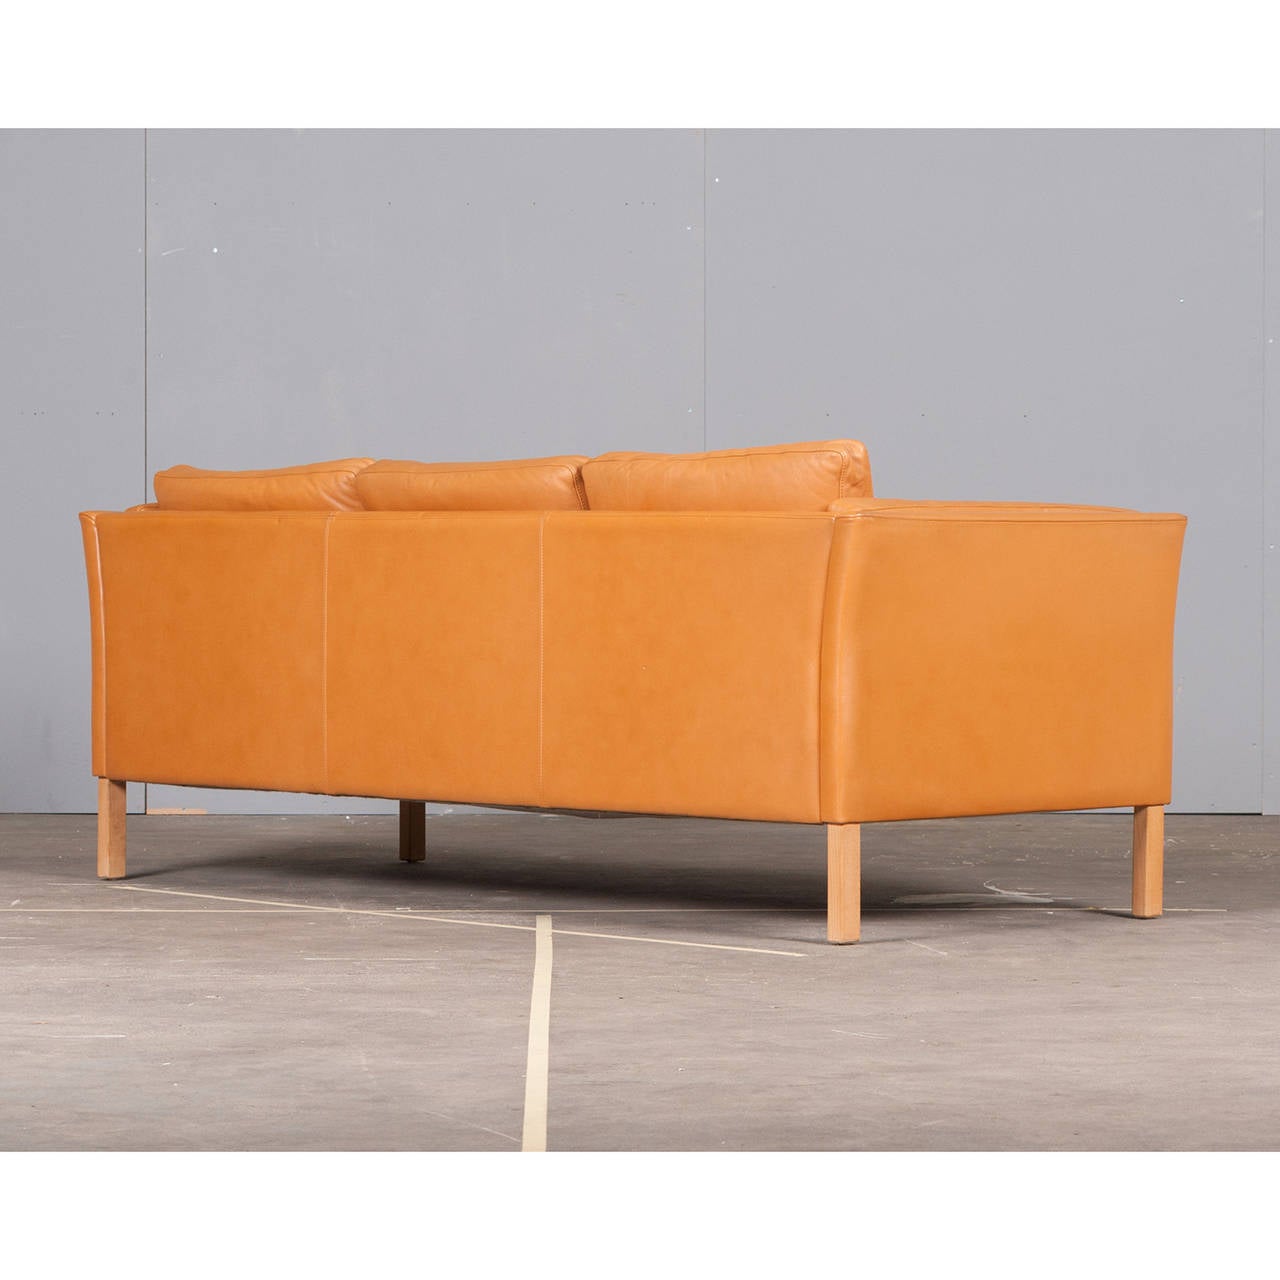 Danish Three-Seater Sofa in Honey Tan Leather, 1960s For Sale 2